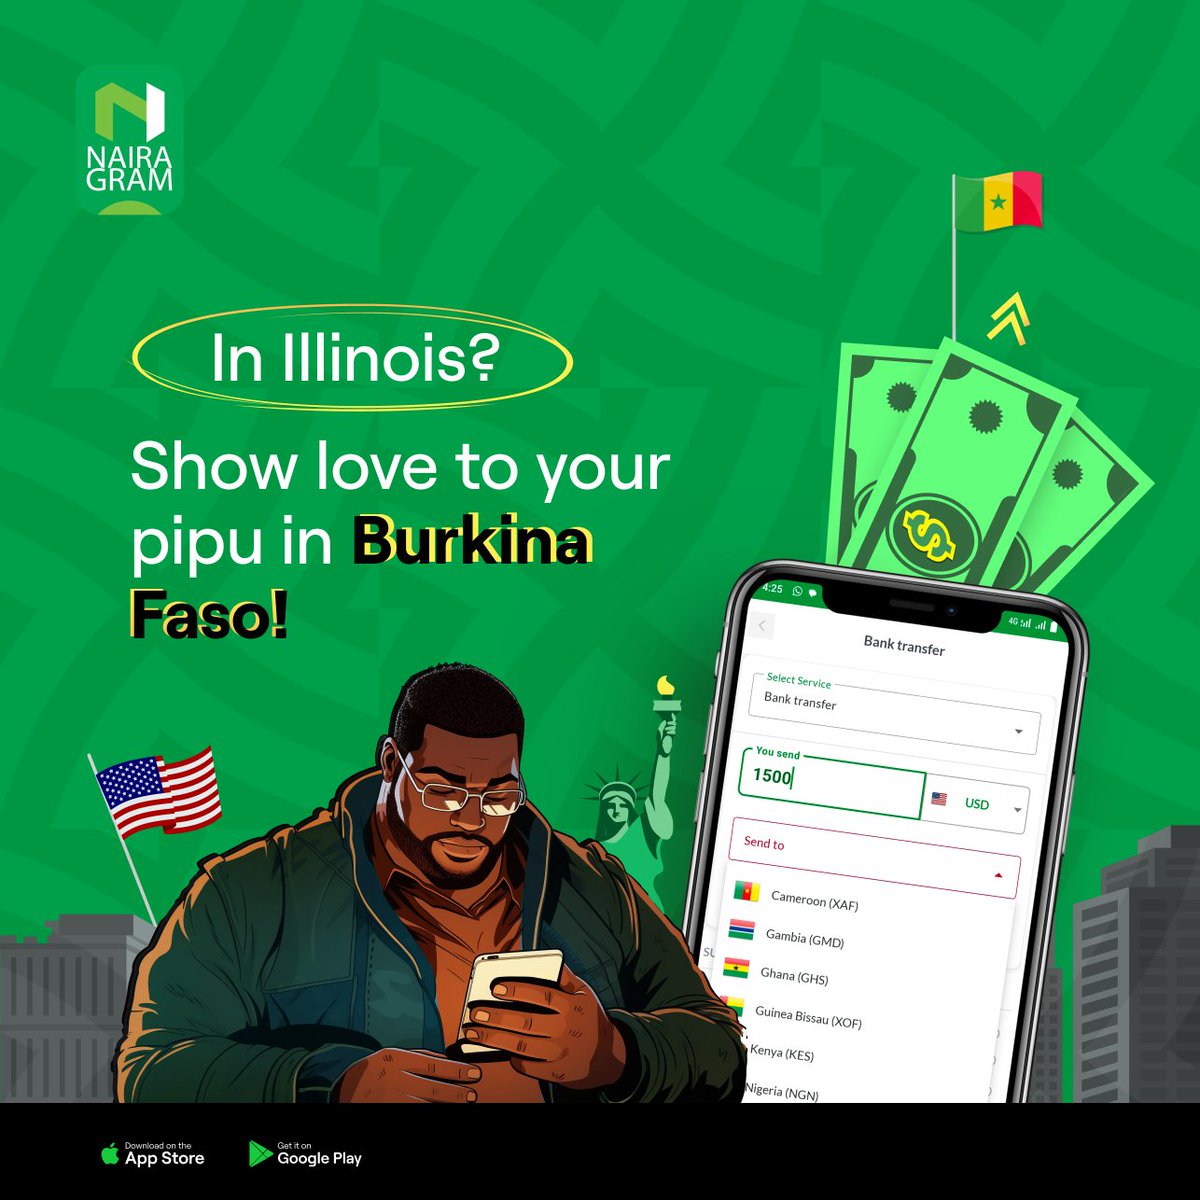 Sending funds home to Burkina Faso and over 30 African countries is super easy and safe with us. 

Remember, we’re available in these US states for transactions that matter across Africa: 

Georgia, Illinois, Maryland, and Minnesota. 

#nairagramllc #moneytransfer #sendmoney